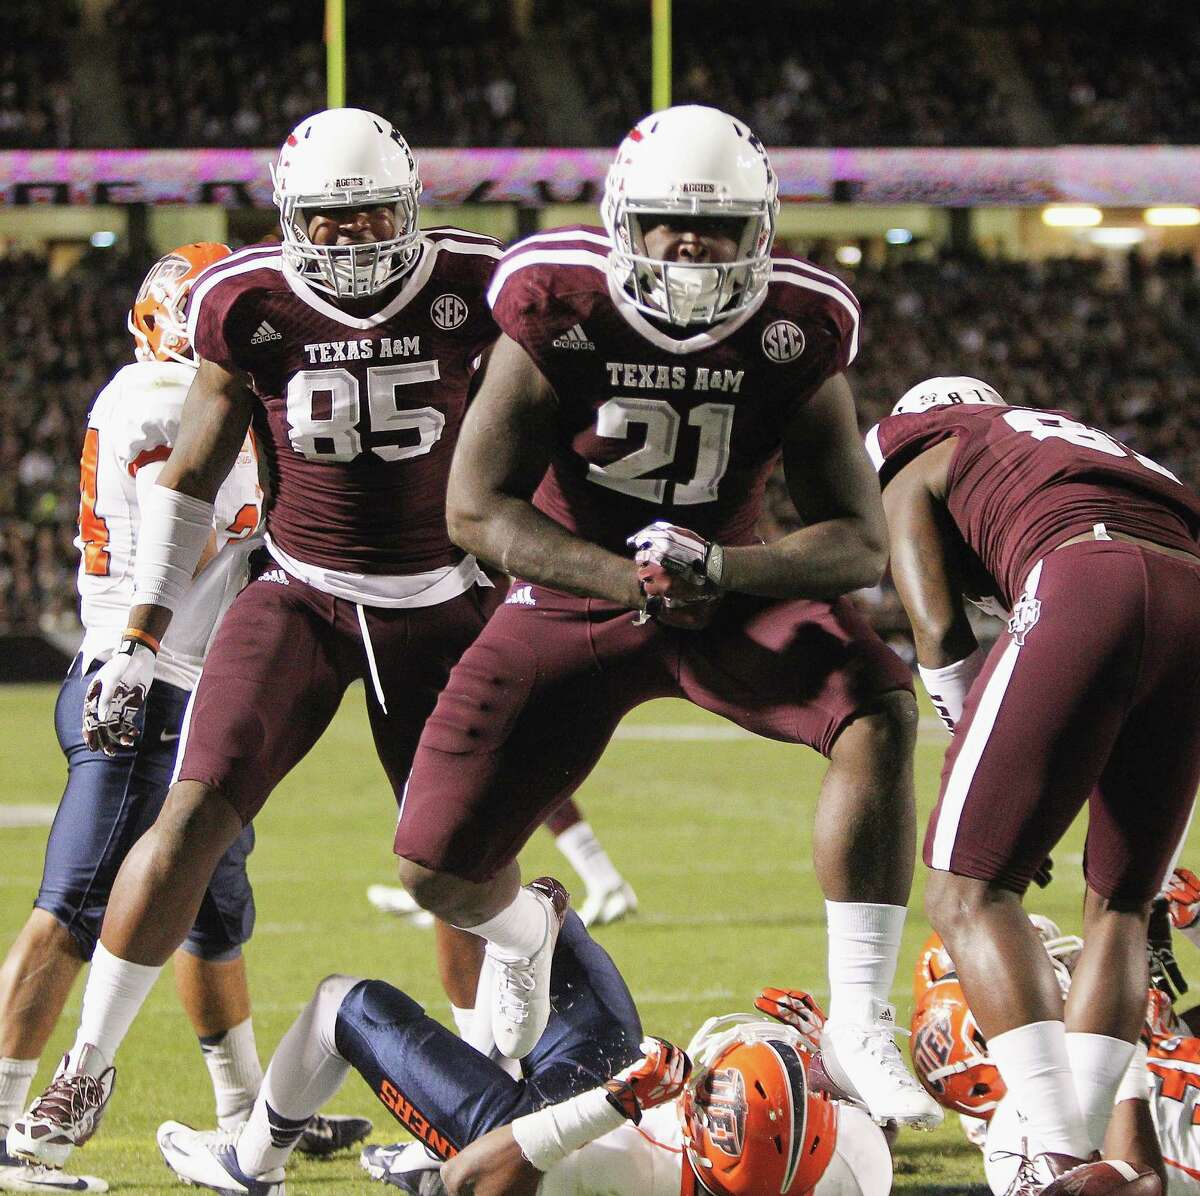 COLLEGE STATION, TX - NOVEMBER 02: Tra Carson #21 of the Texas A&M Aggies celebrates after scoreing in the first quarter against the UTEP Miners at Kyle Field on November 2, 2013 in College Station, Texas.